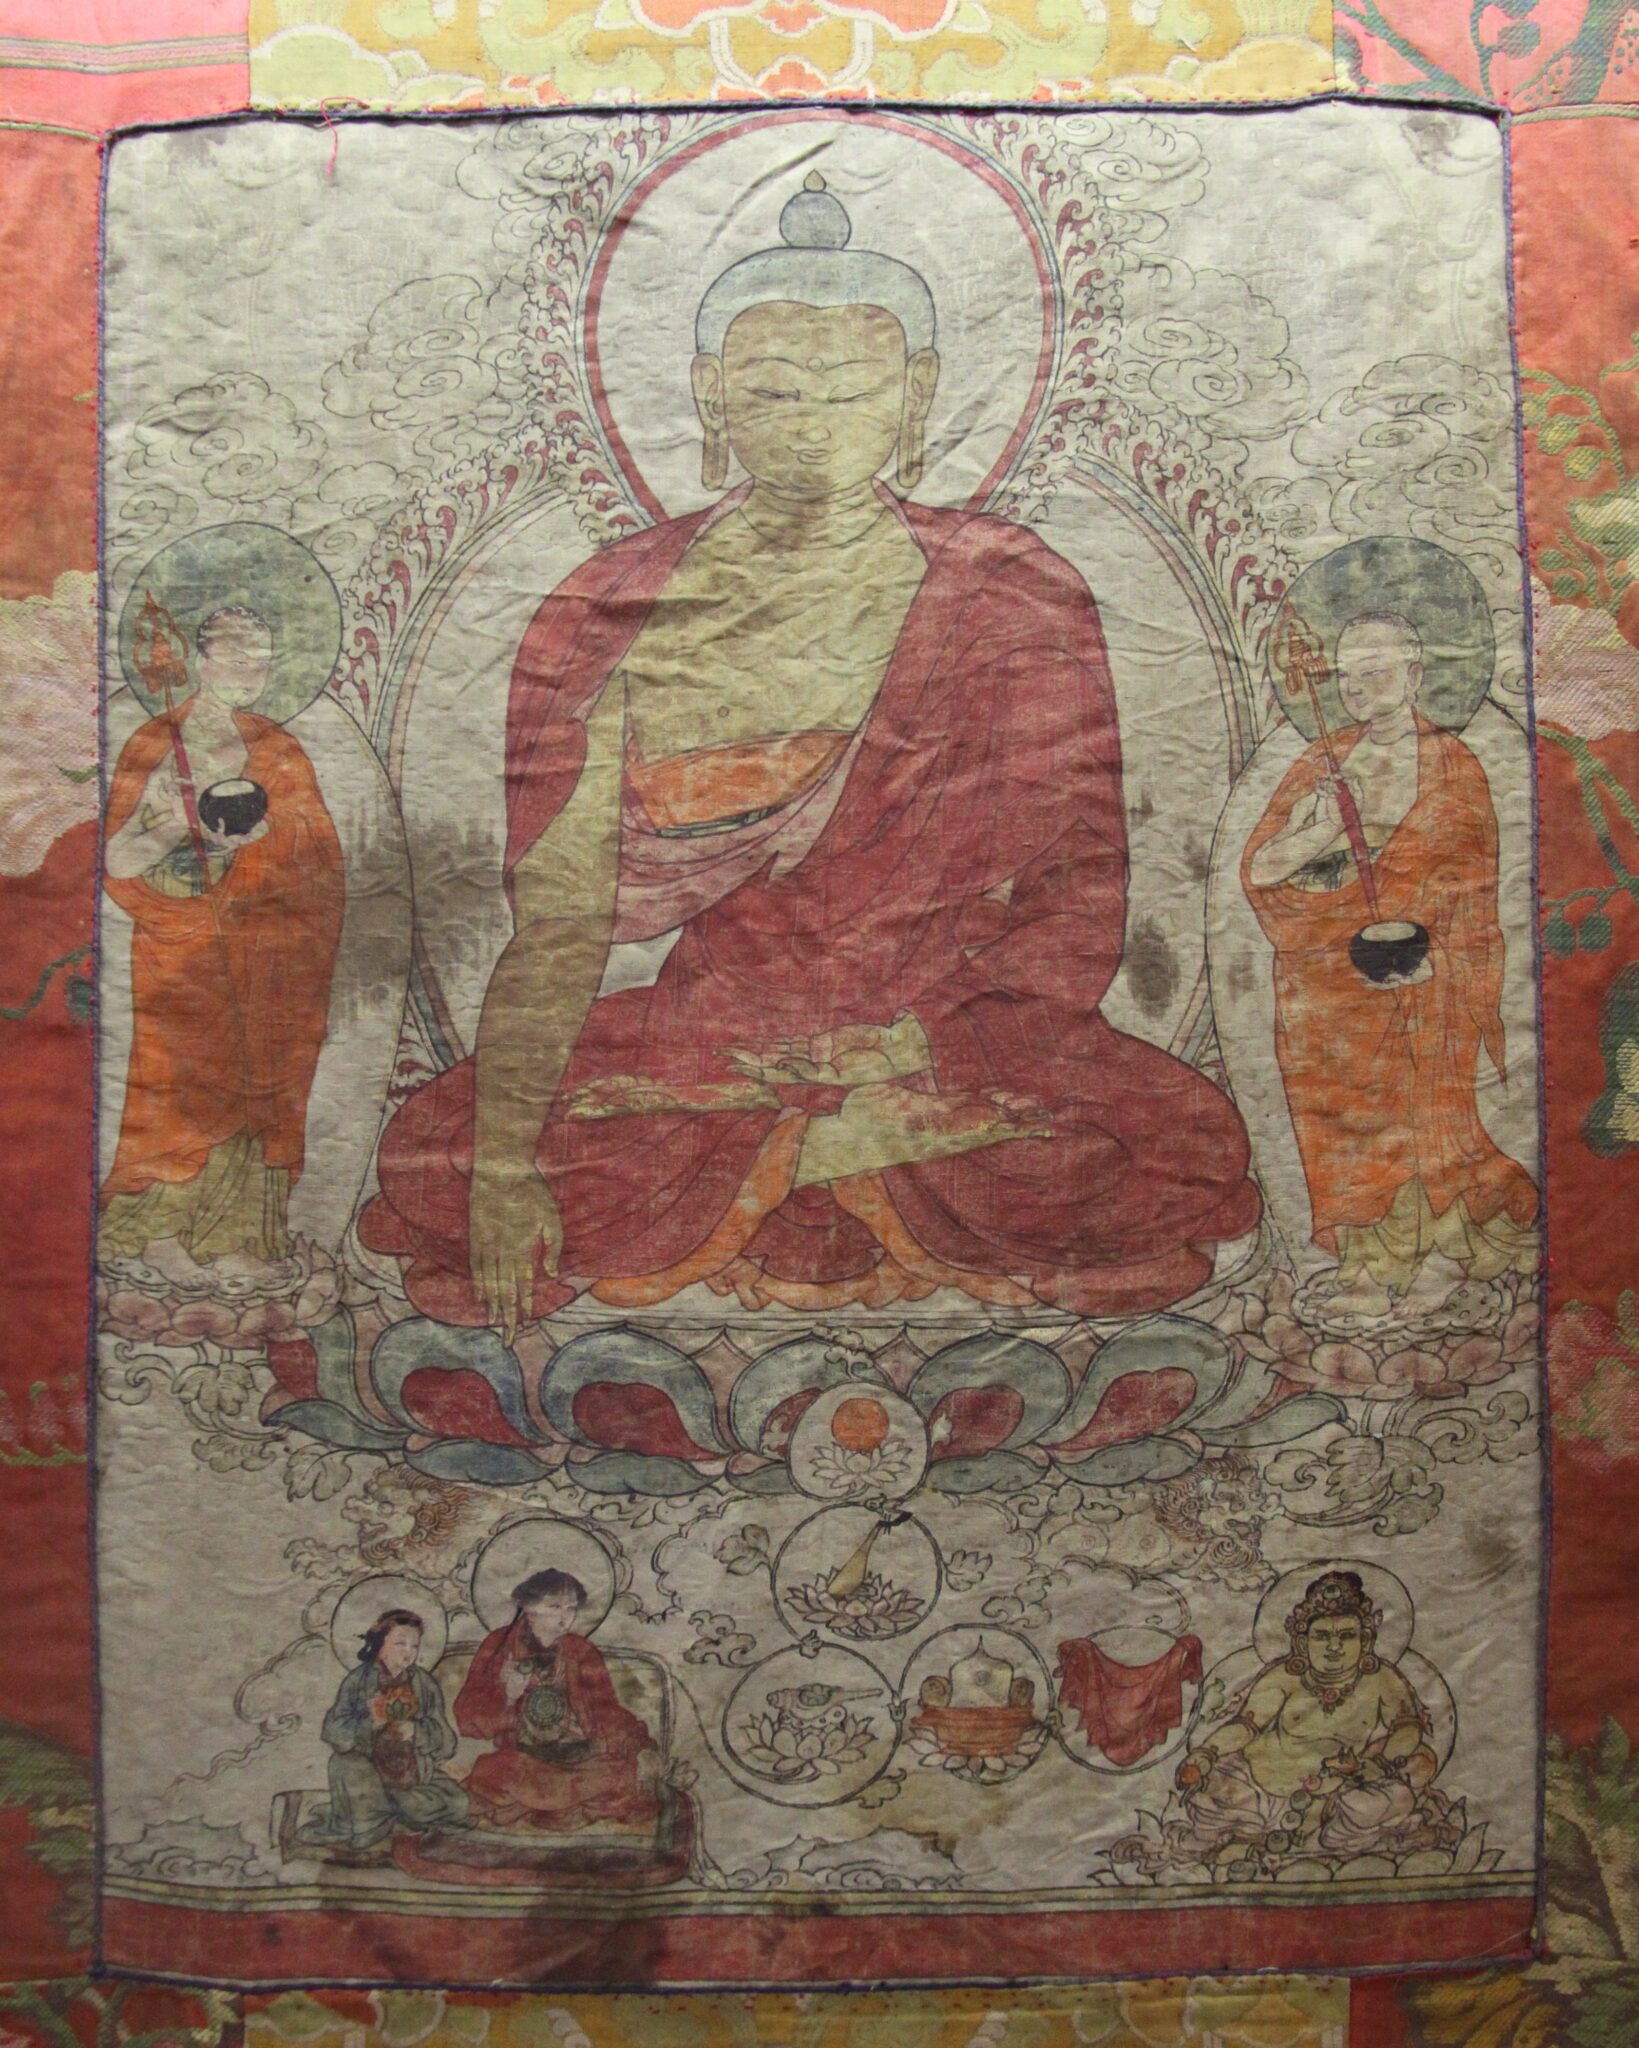 Painting on silk depicting seated Buddha flanked by attendants hovering above scene featuring three figures